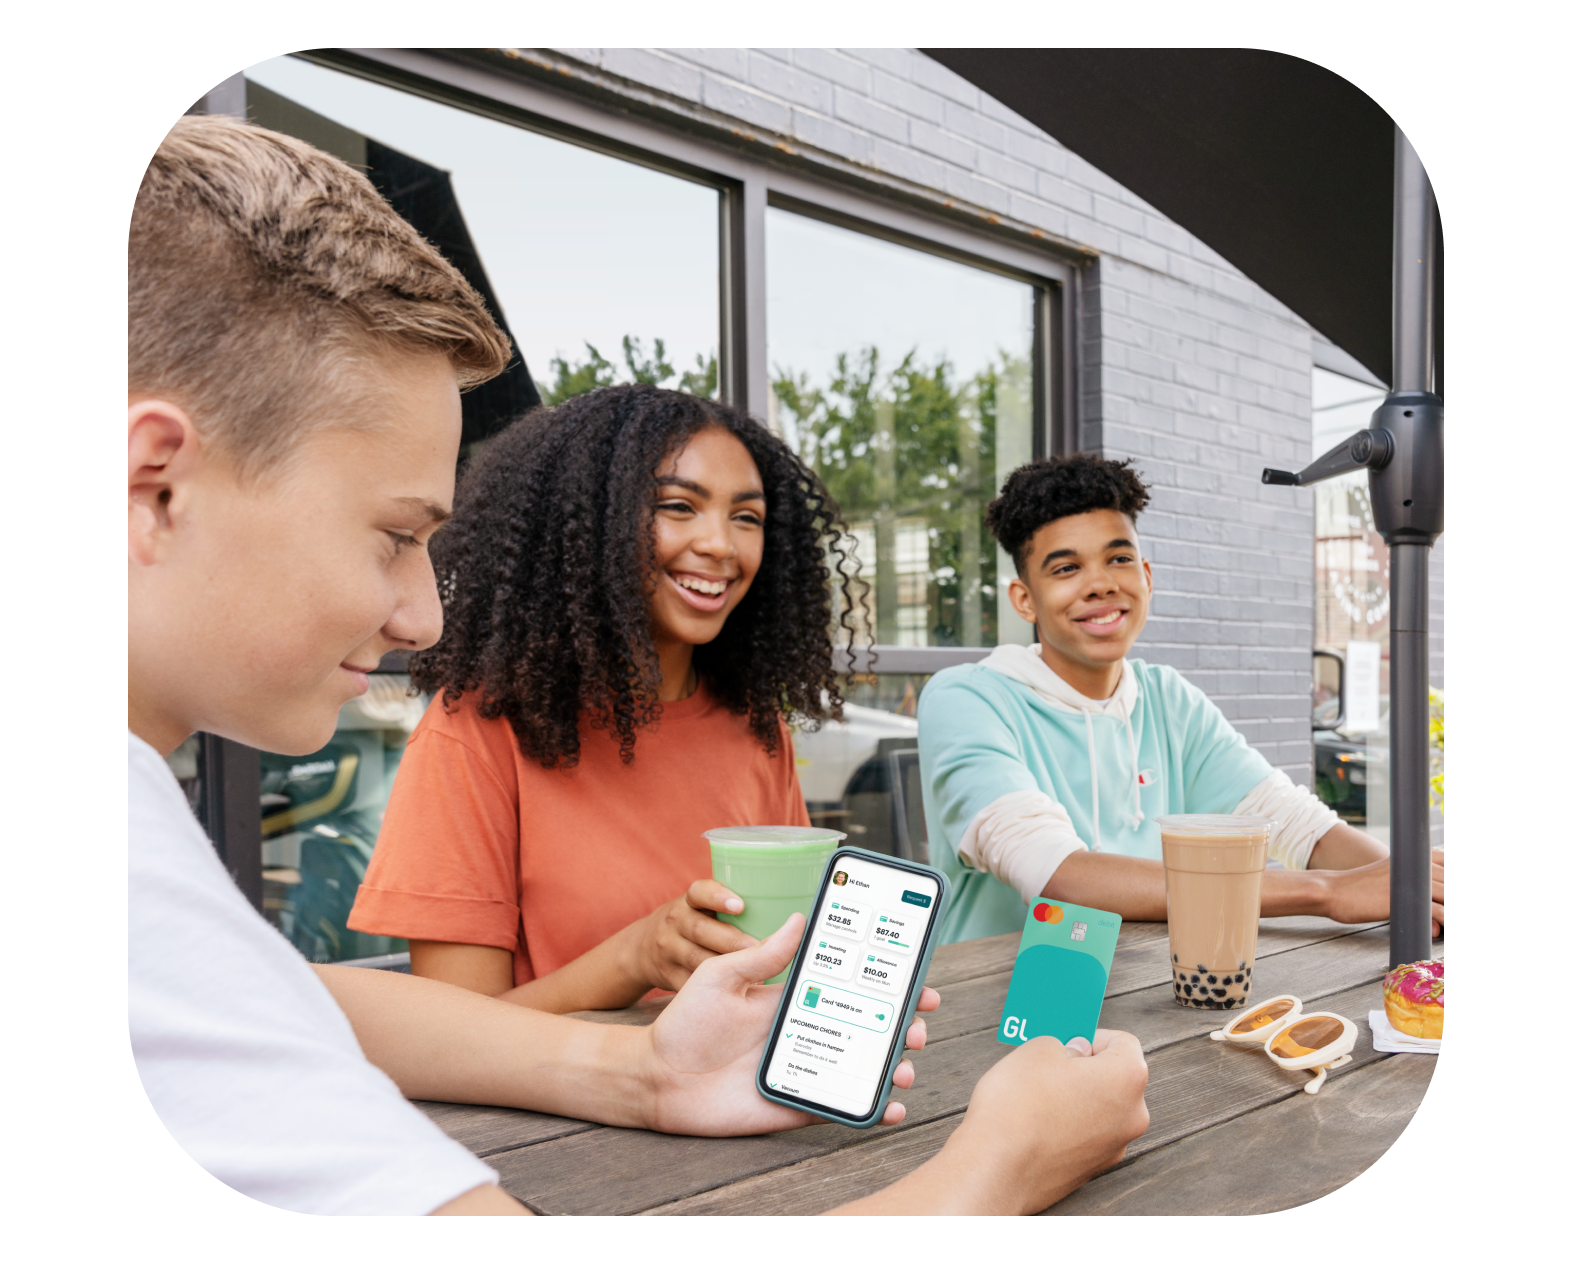 Three teens sitting outside laughing while one teen uses Greenlight debit card and mobile app to refer a friend and collect rewards